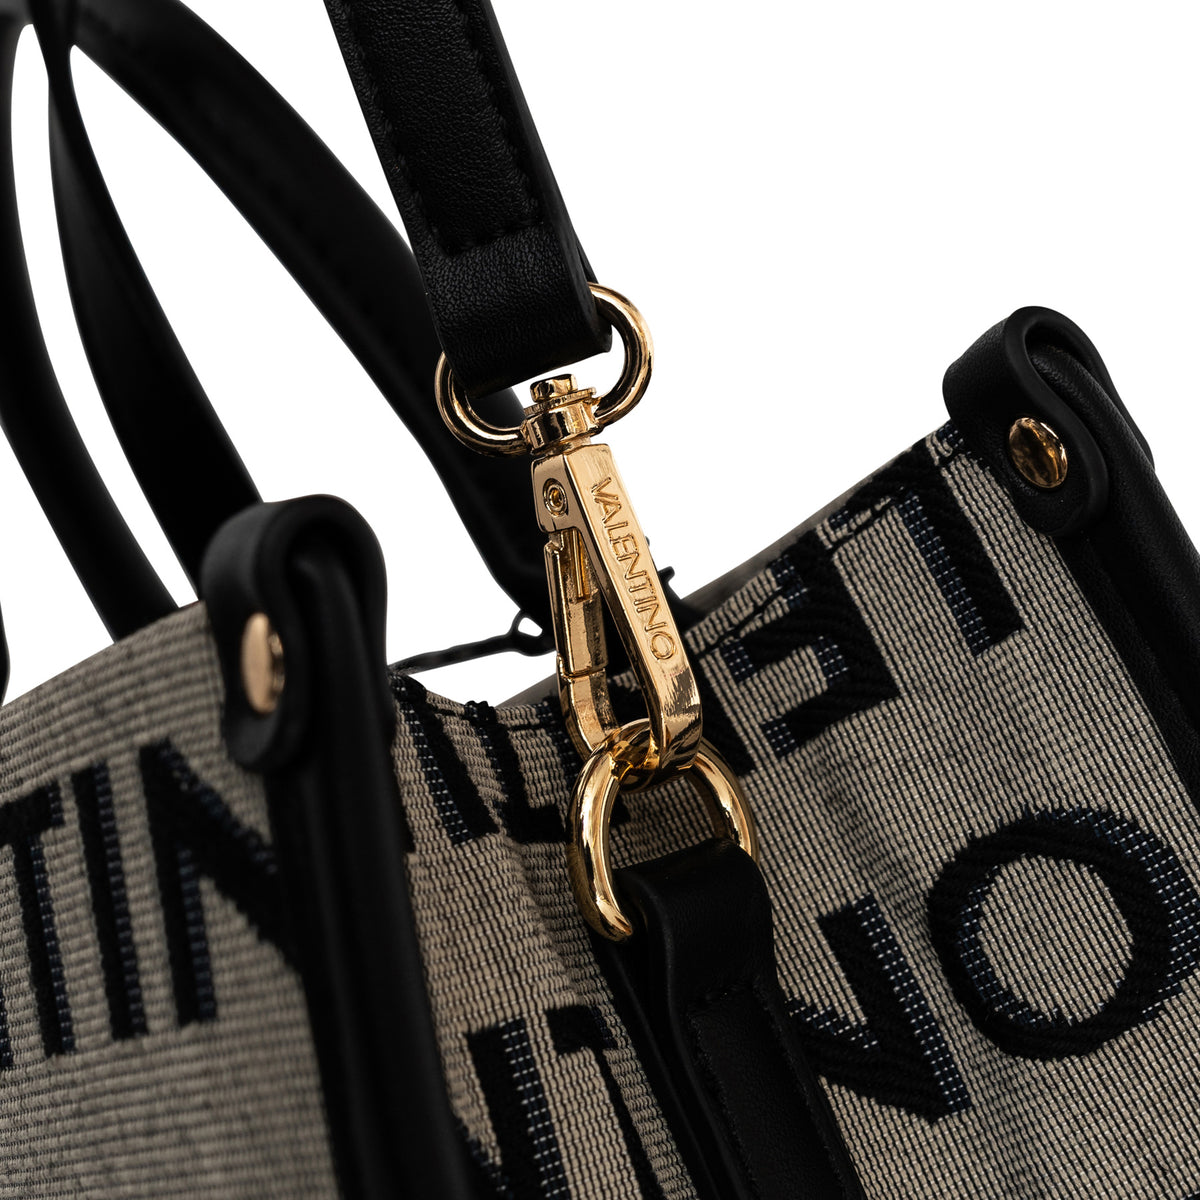 Load image into Gallery viewer, Valentino Bags Black Multi August Tote Bag
